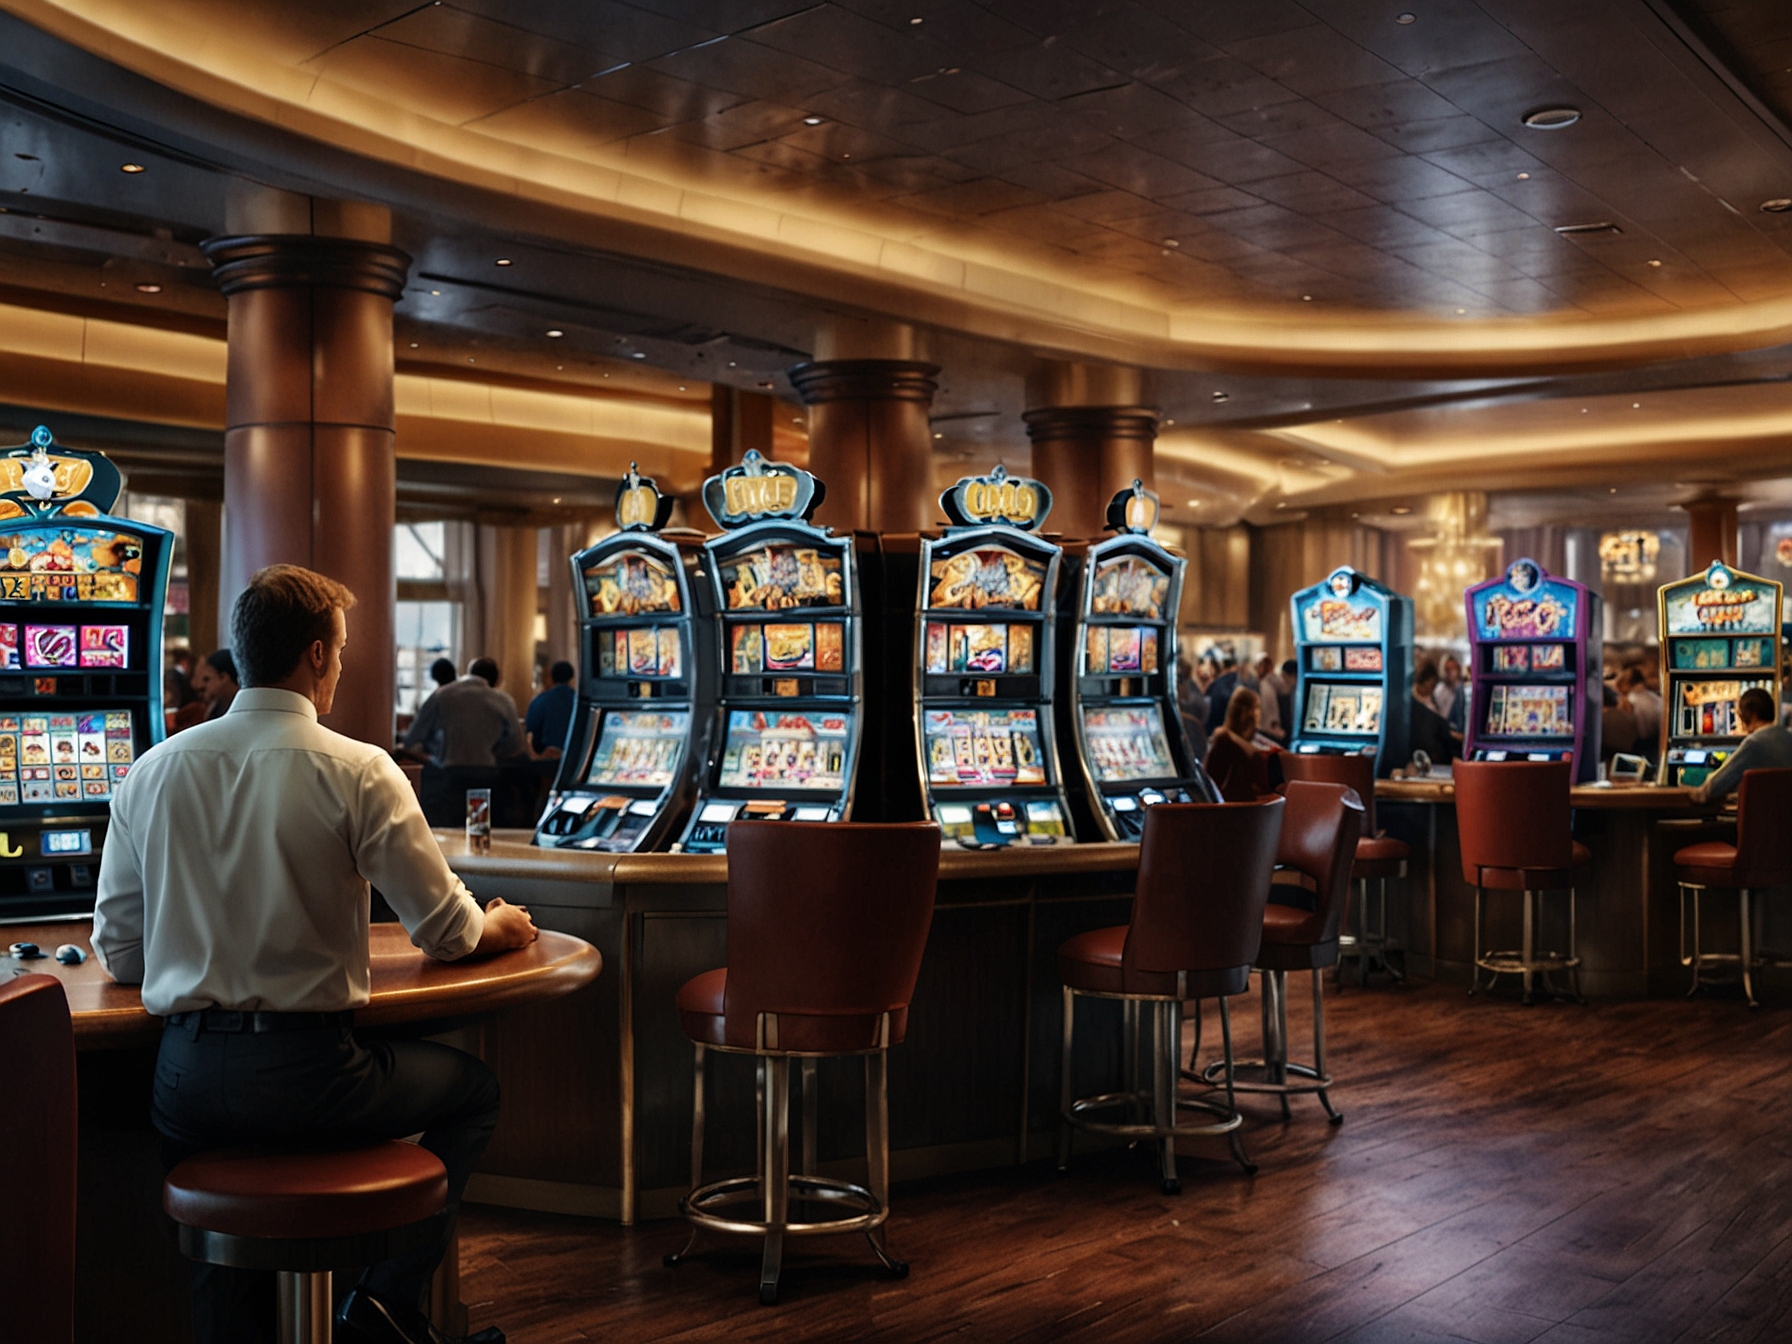 A bustling Star Entertainment casino featuring advanced gaming machines and engaged customers, illustrating the company's focus on innovative and enhanced customer experiences.